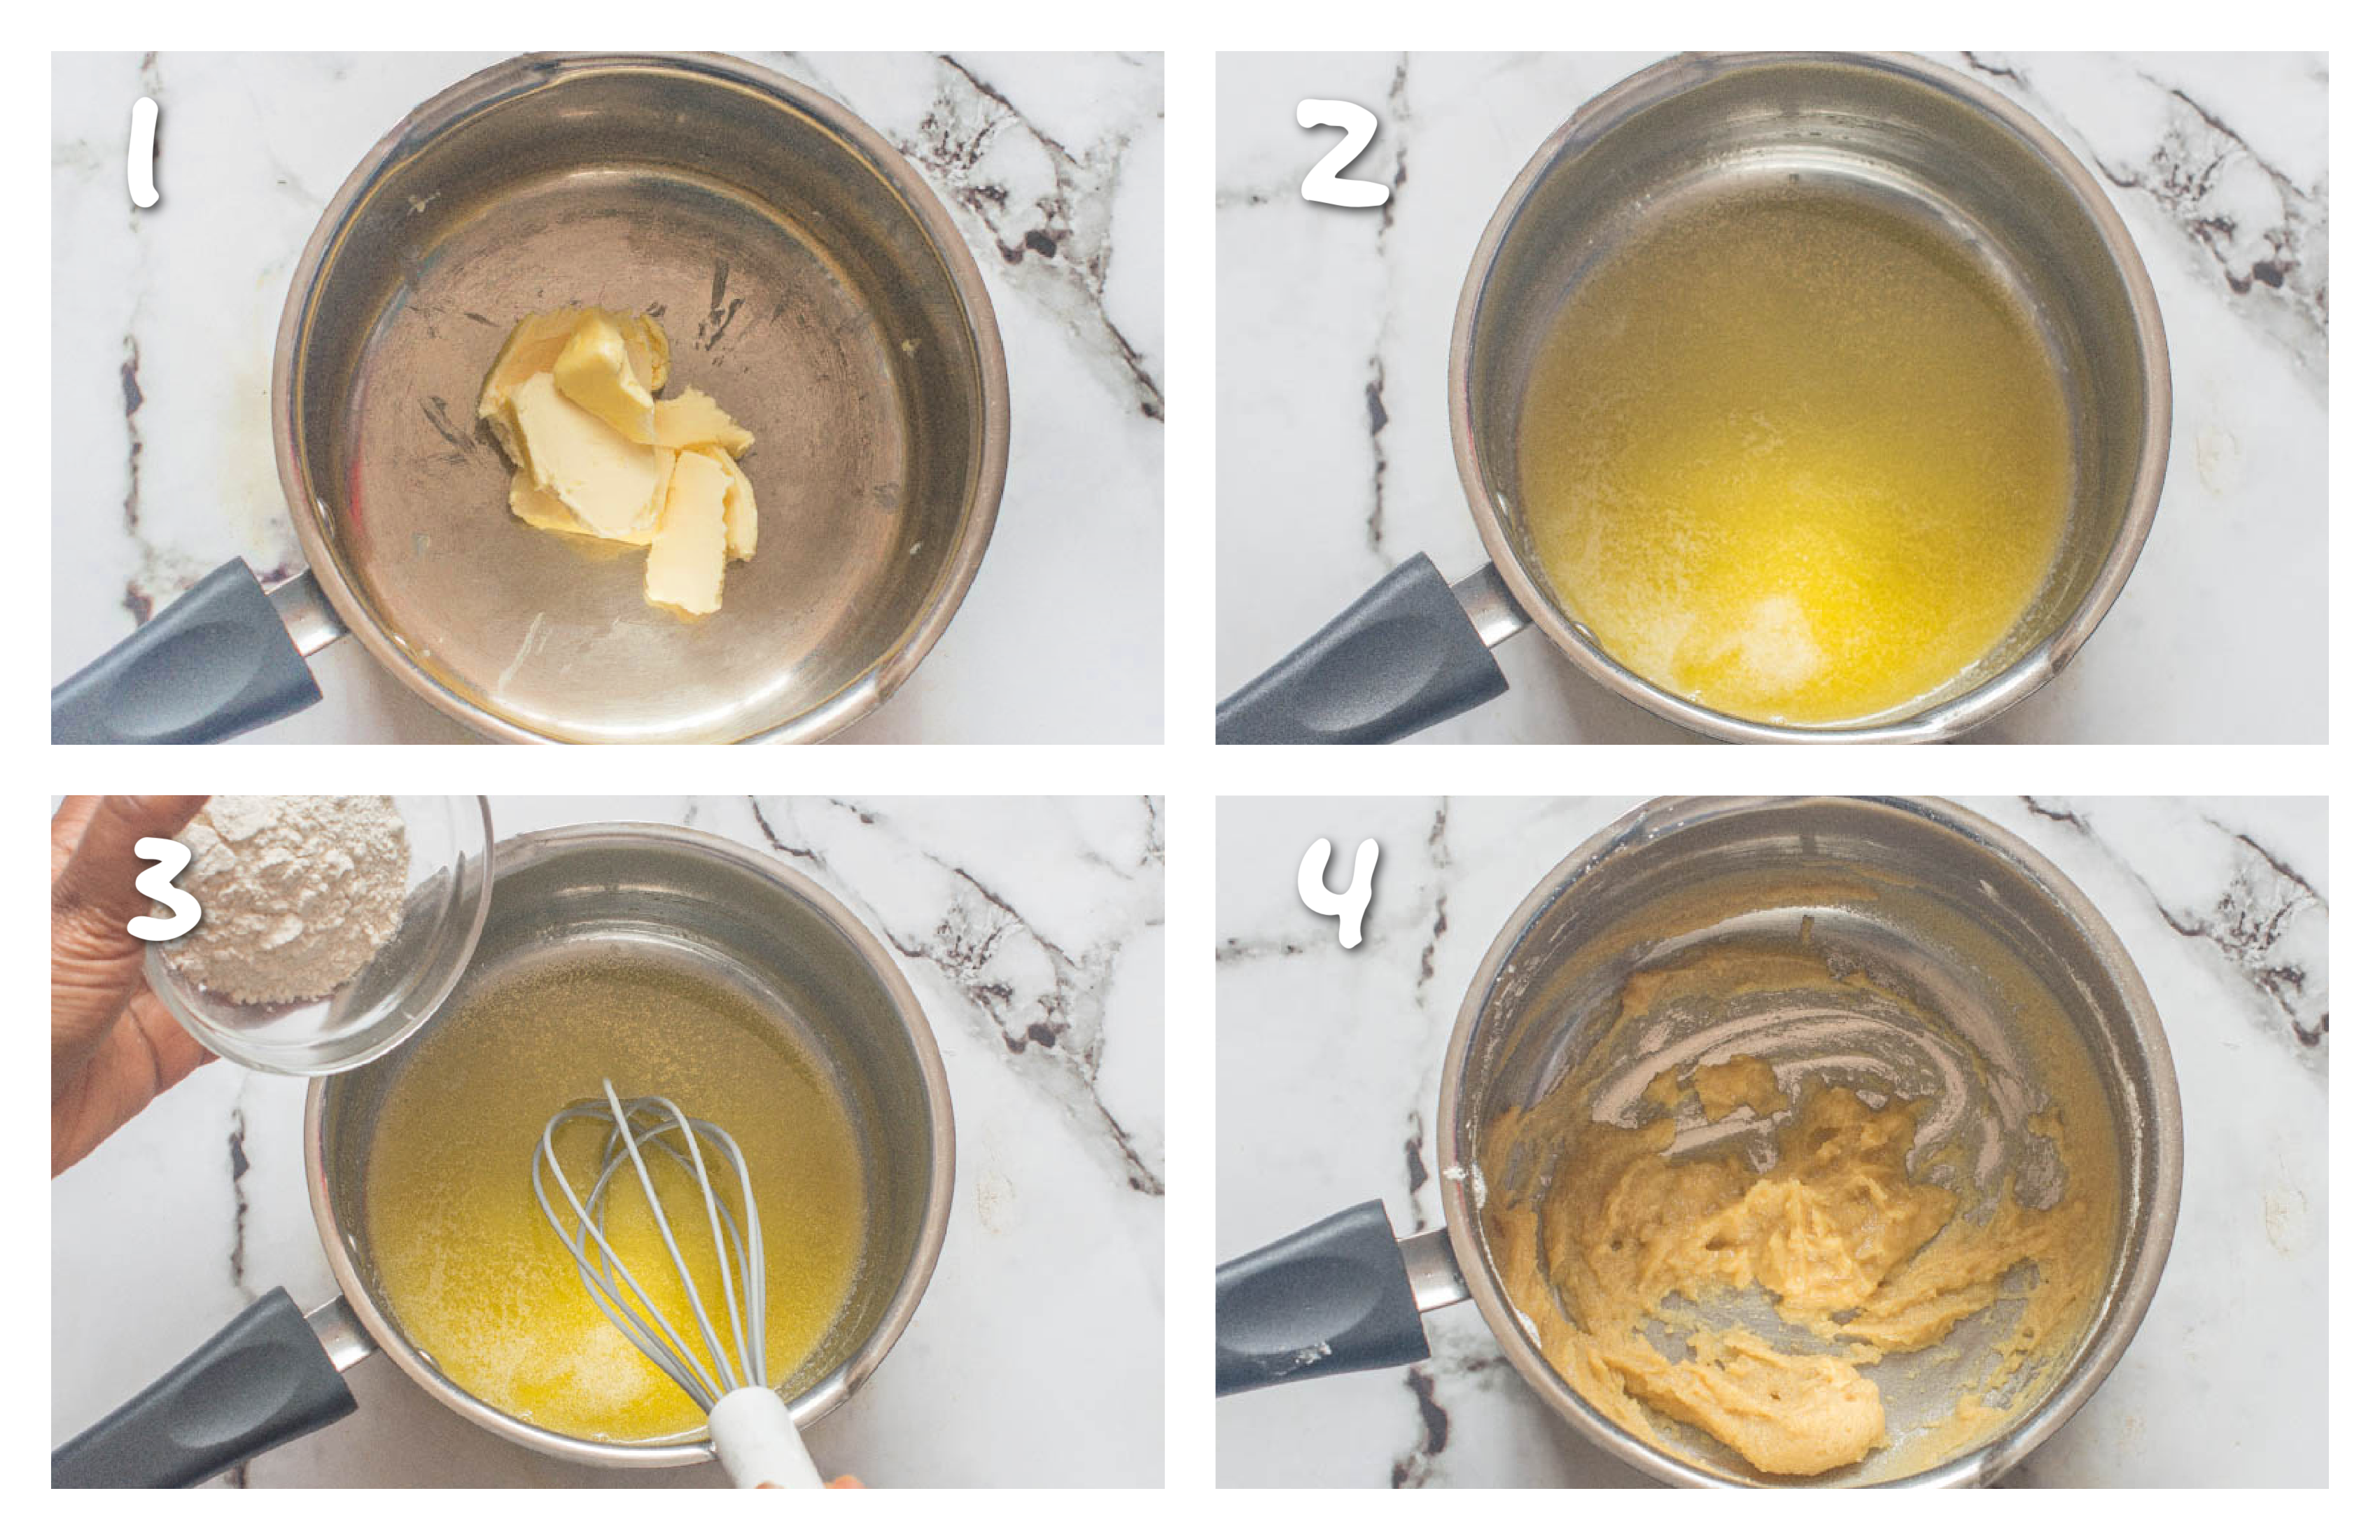 Steps 1-4 making the roux